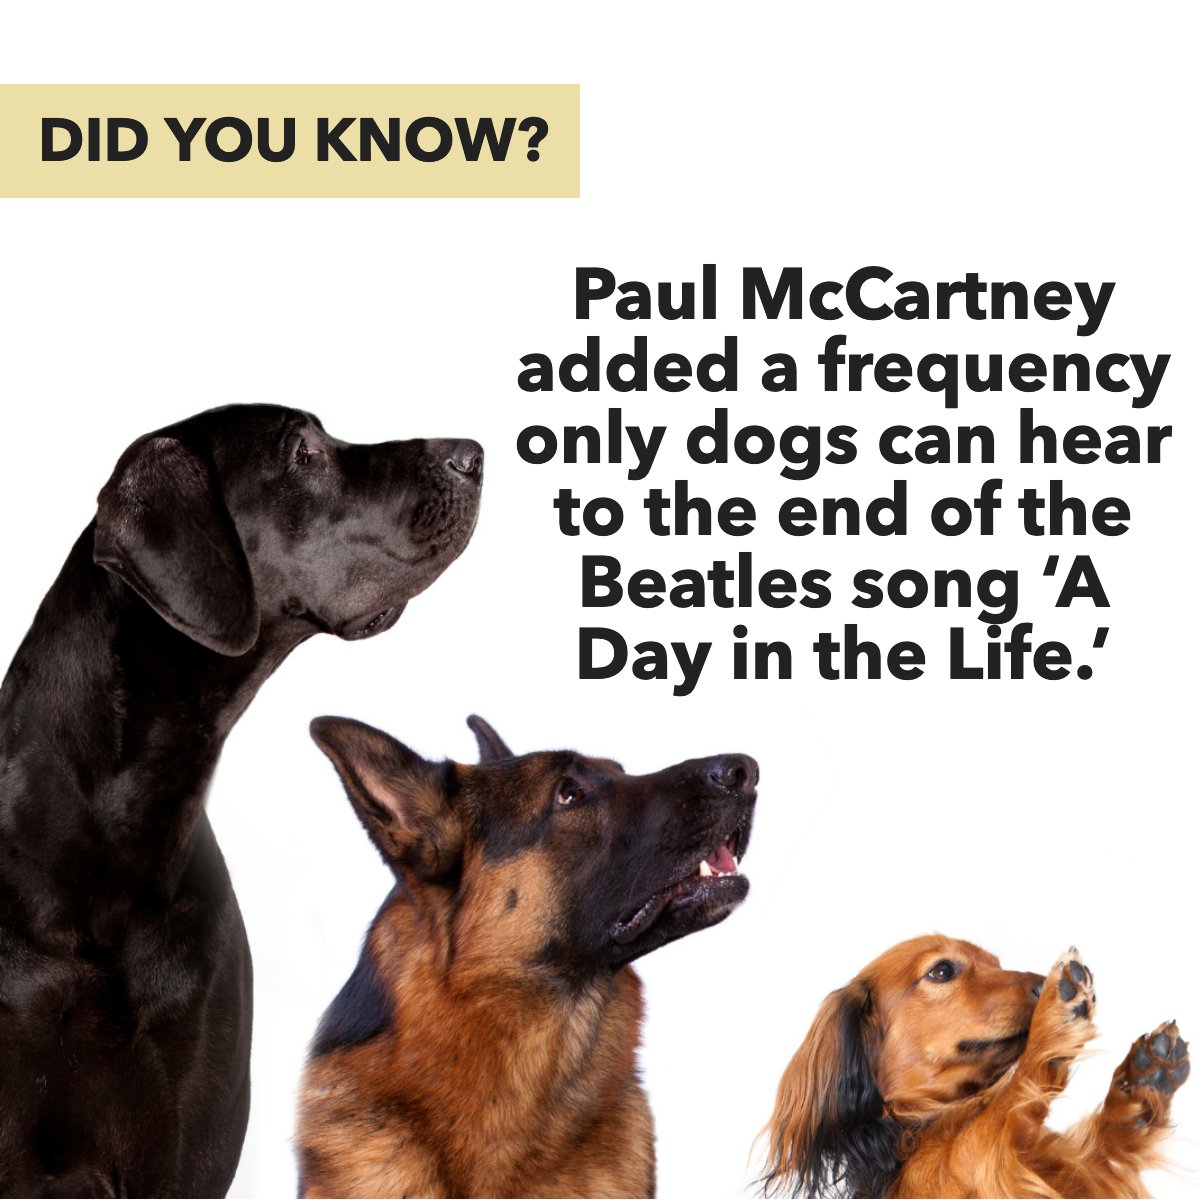 Who knows, your dog may even become a fan, as the high frequency 15 kilohertz sound can be detected by canines but not the human ear. 😜

#music #love #dogs #doglovers 
 #Gastonia #GastonHomeOfTheWeek #HanksRealtyGroup #HRG #RealEstateExperts #GastonRealEstate